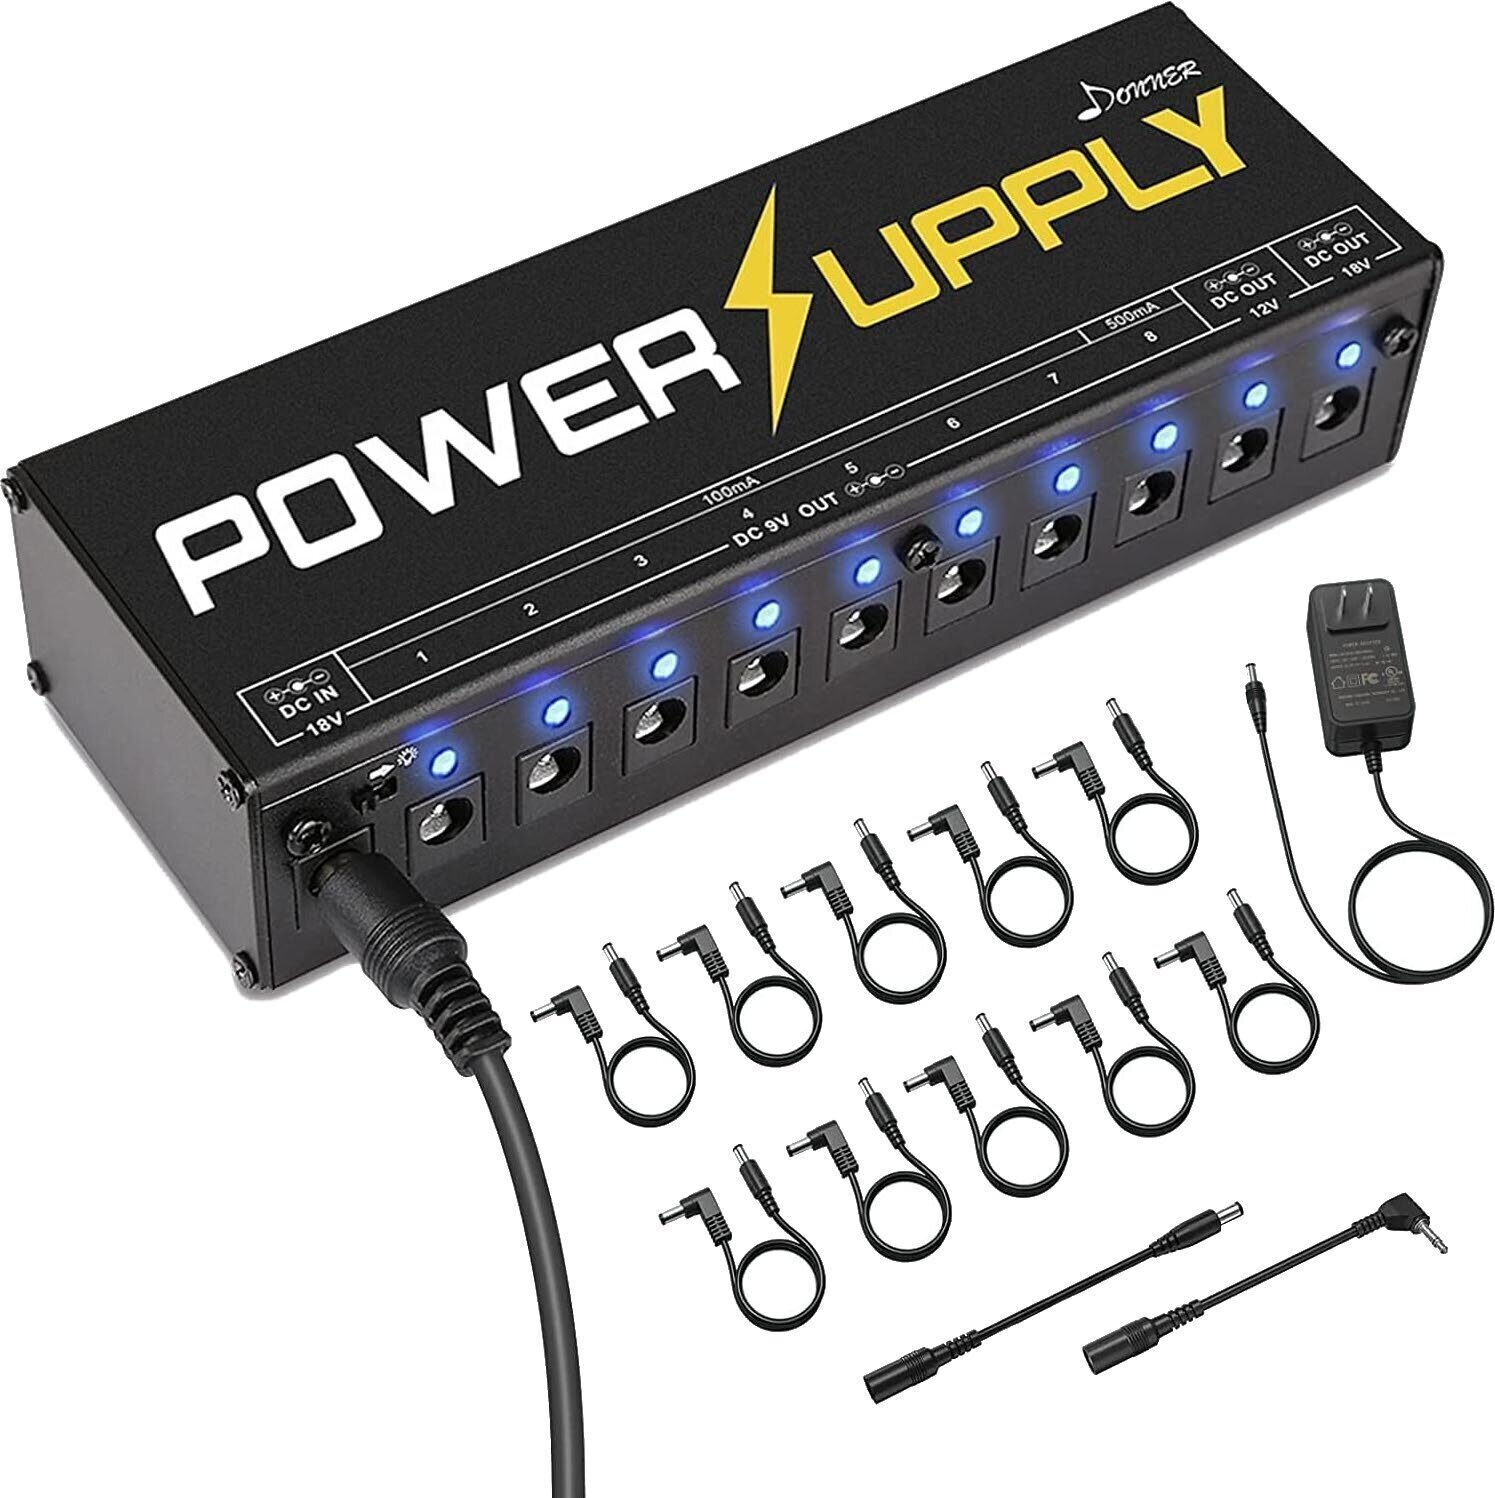 Adaptateur d'alimentation Donner EC812 DP-1 10 Isolated Output Guitar Effect Pedals Power Supply